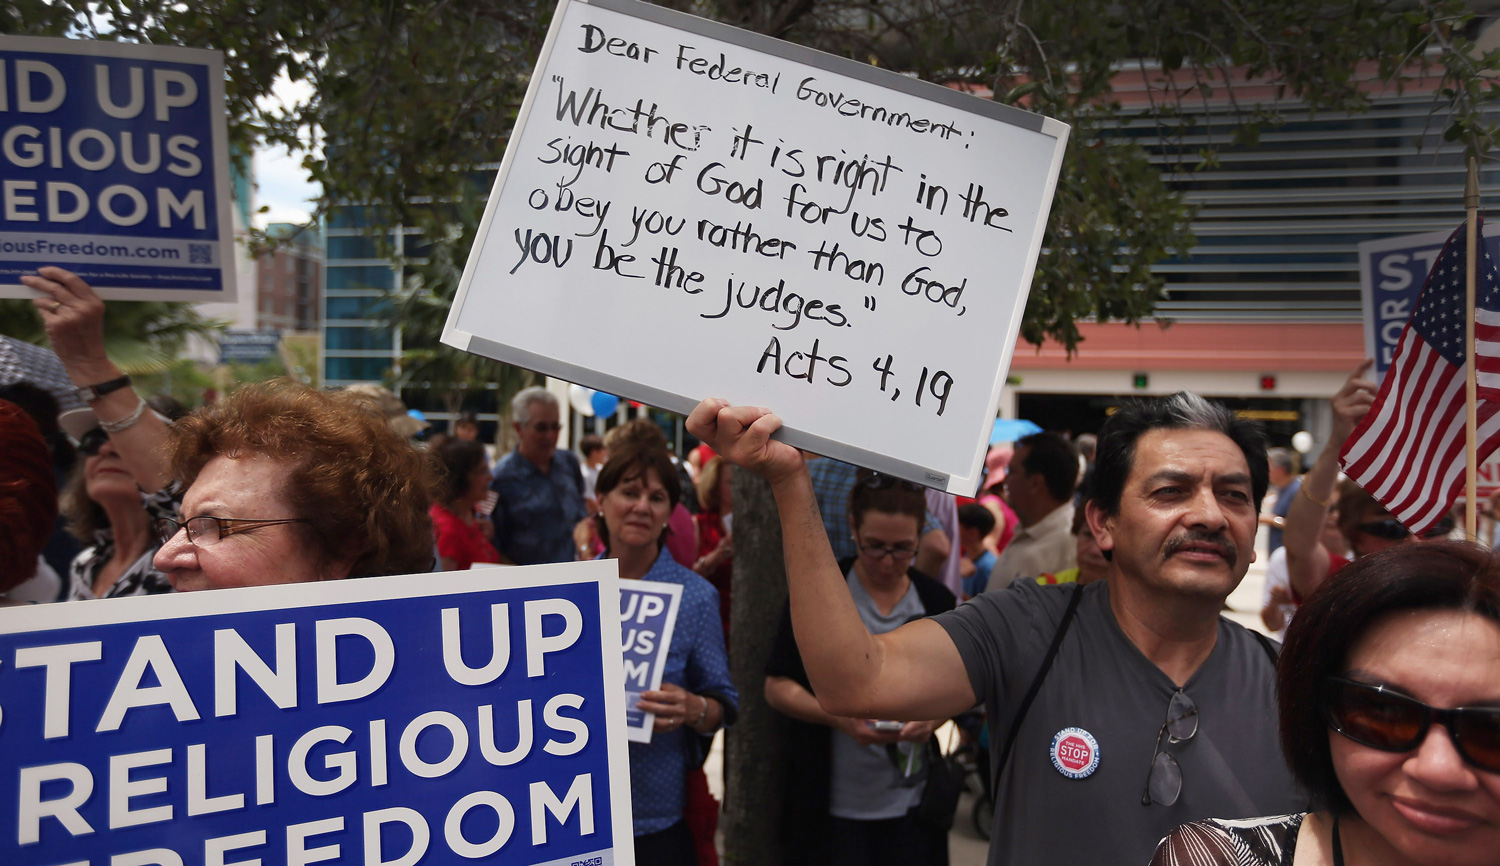 Protesters at a religious freedom rally on June 8, 2012 in Miami, Florida. Joe Raedle/Getty Images.
